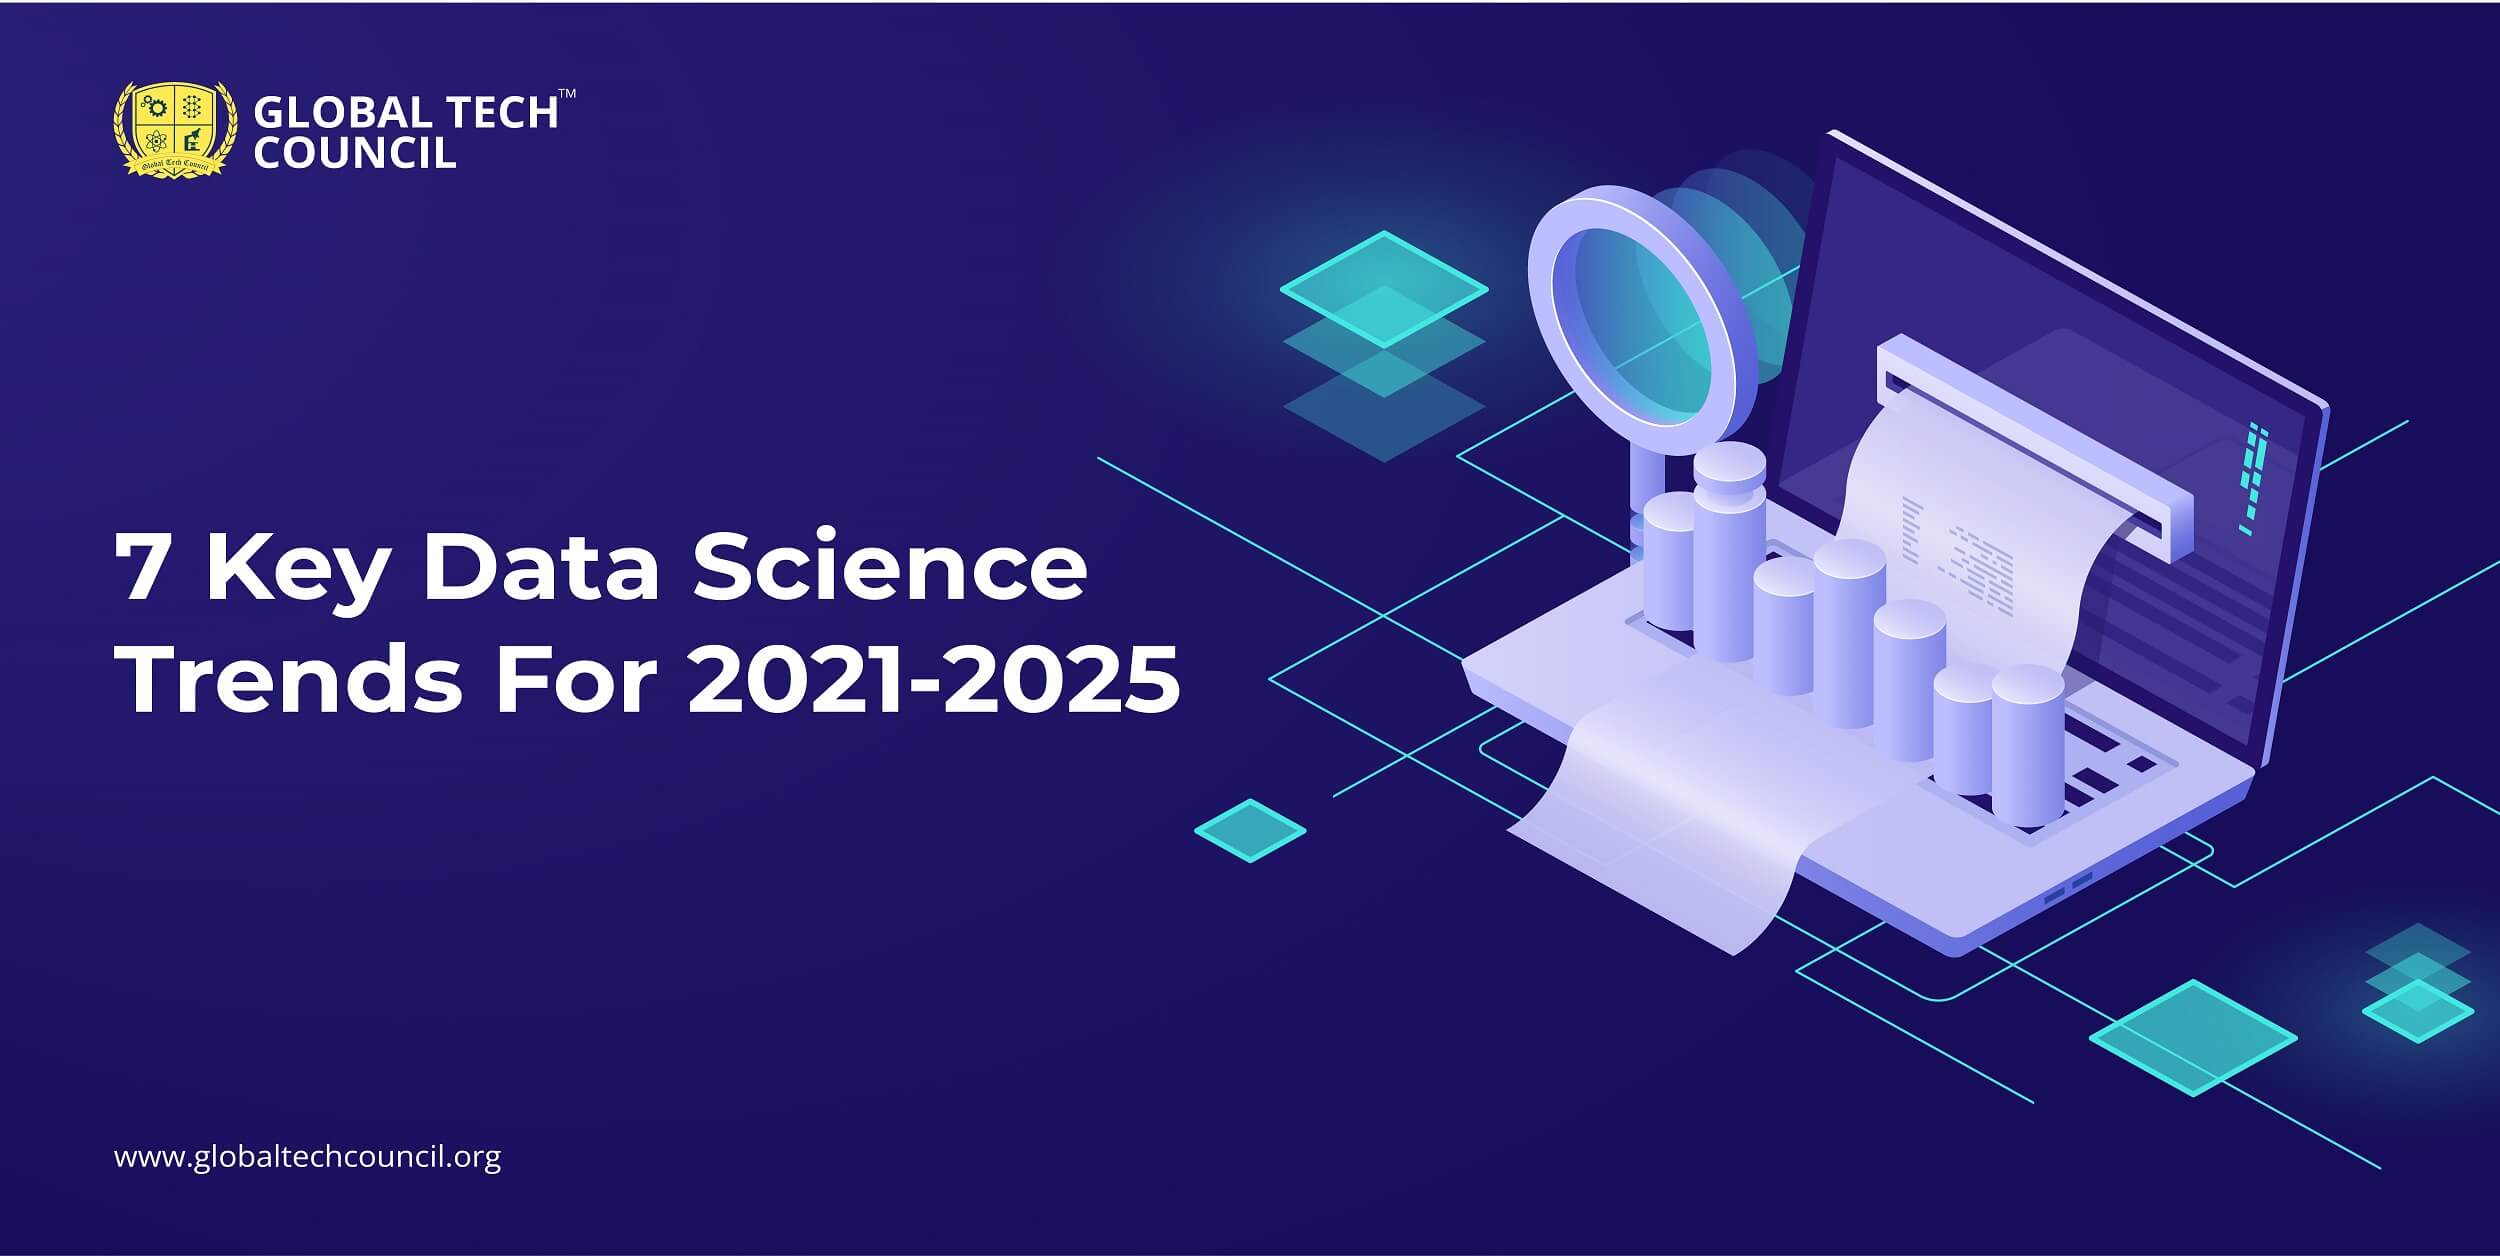 7 Key Data Science Trends For 2021-2025